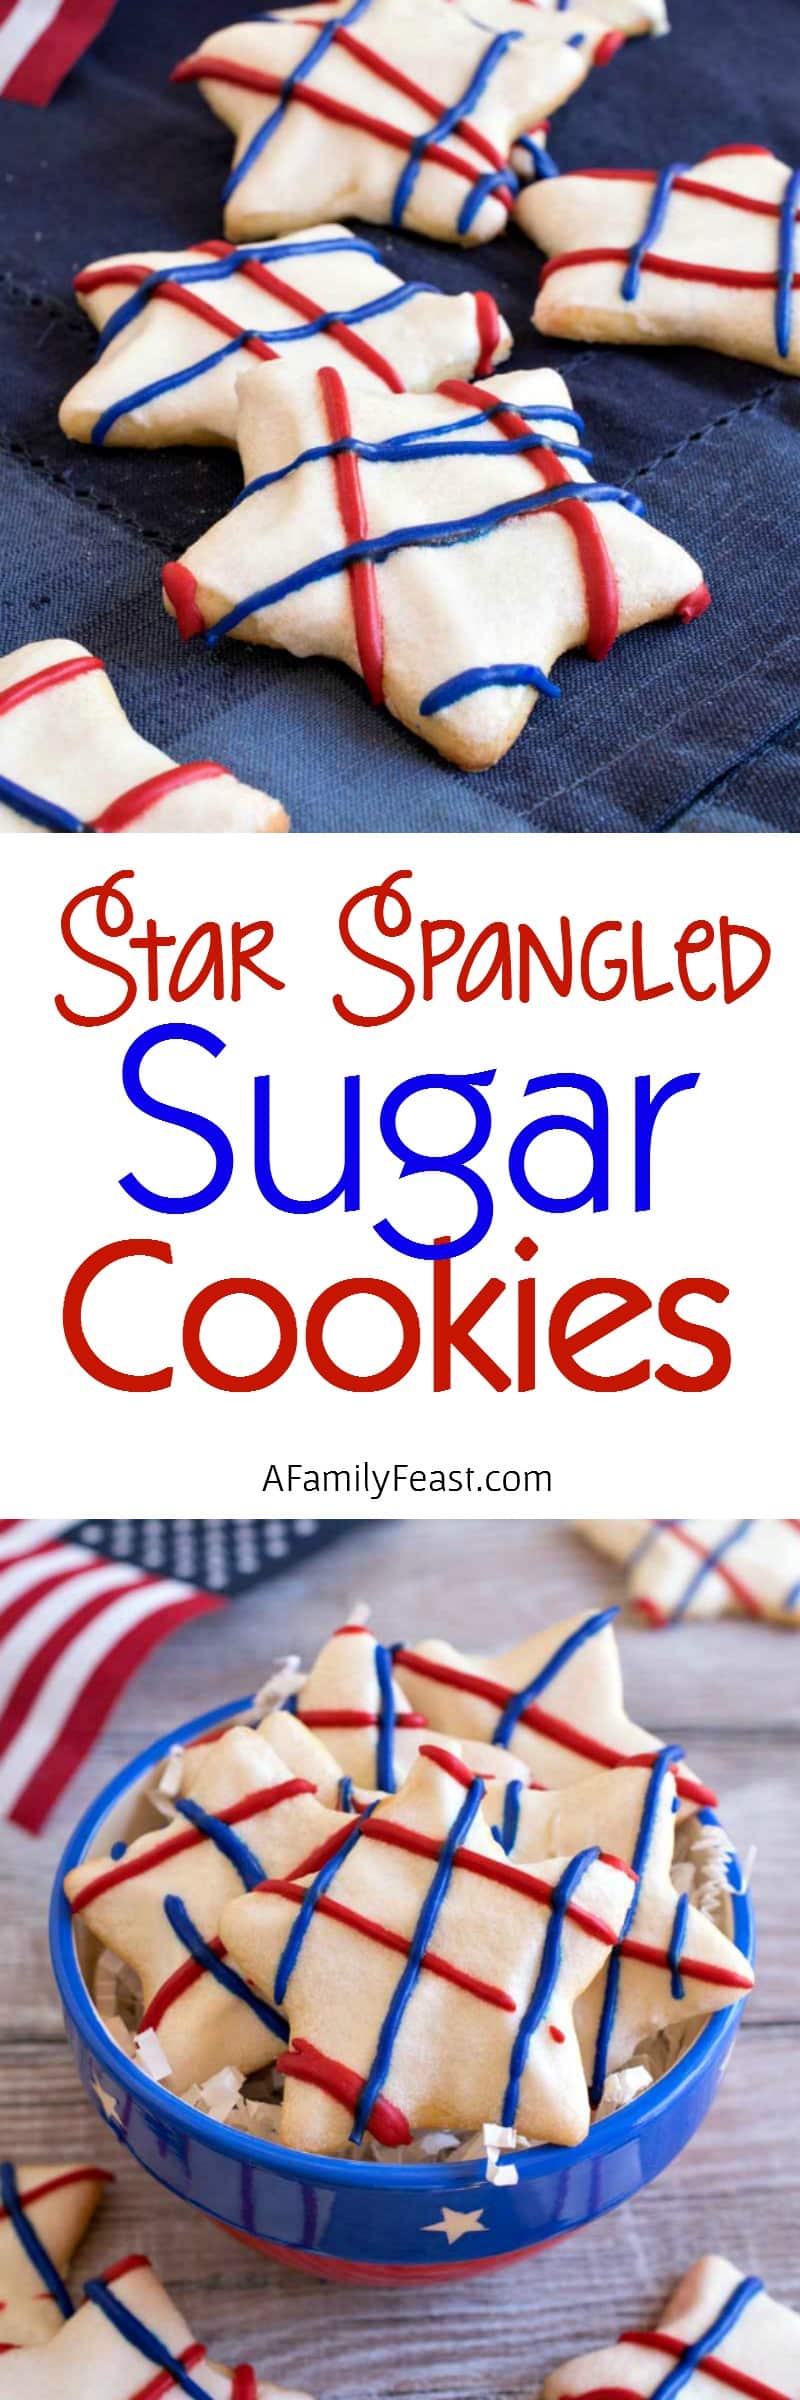 Our Star Spangled Sugar Cookies are a festive addition to any July 4th party menu!